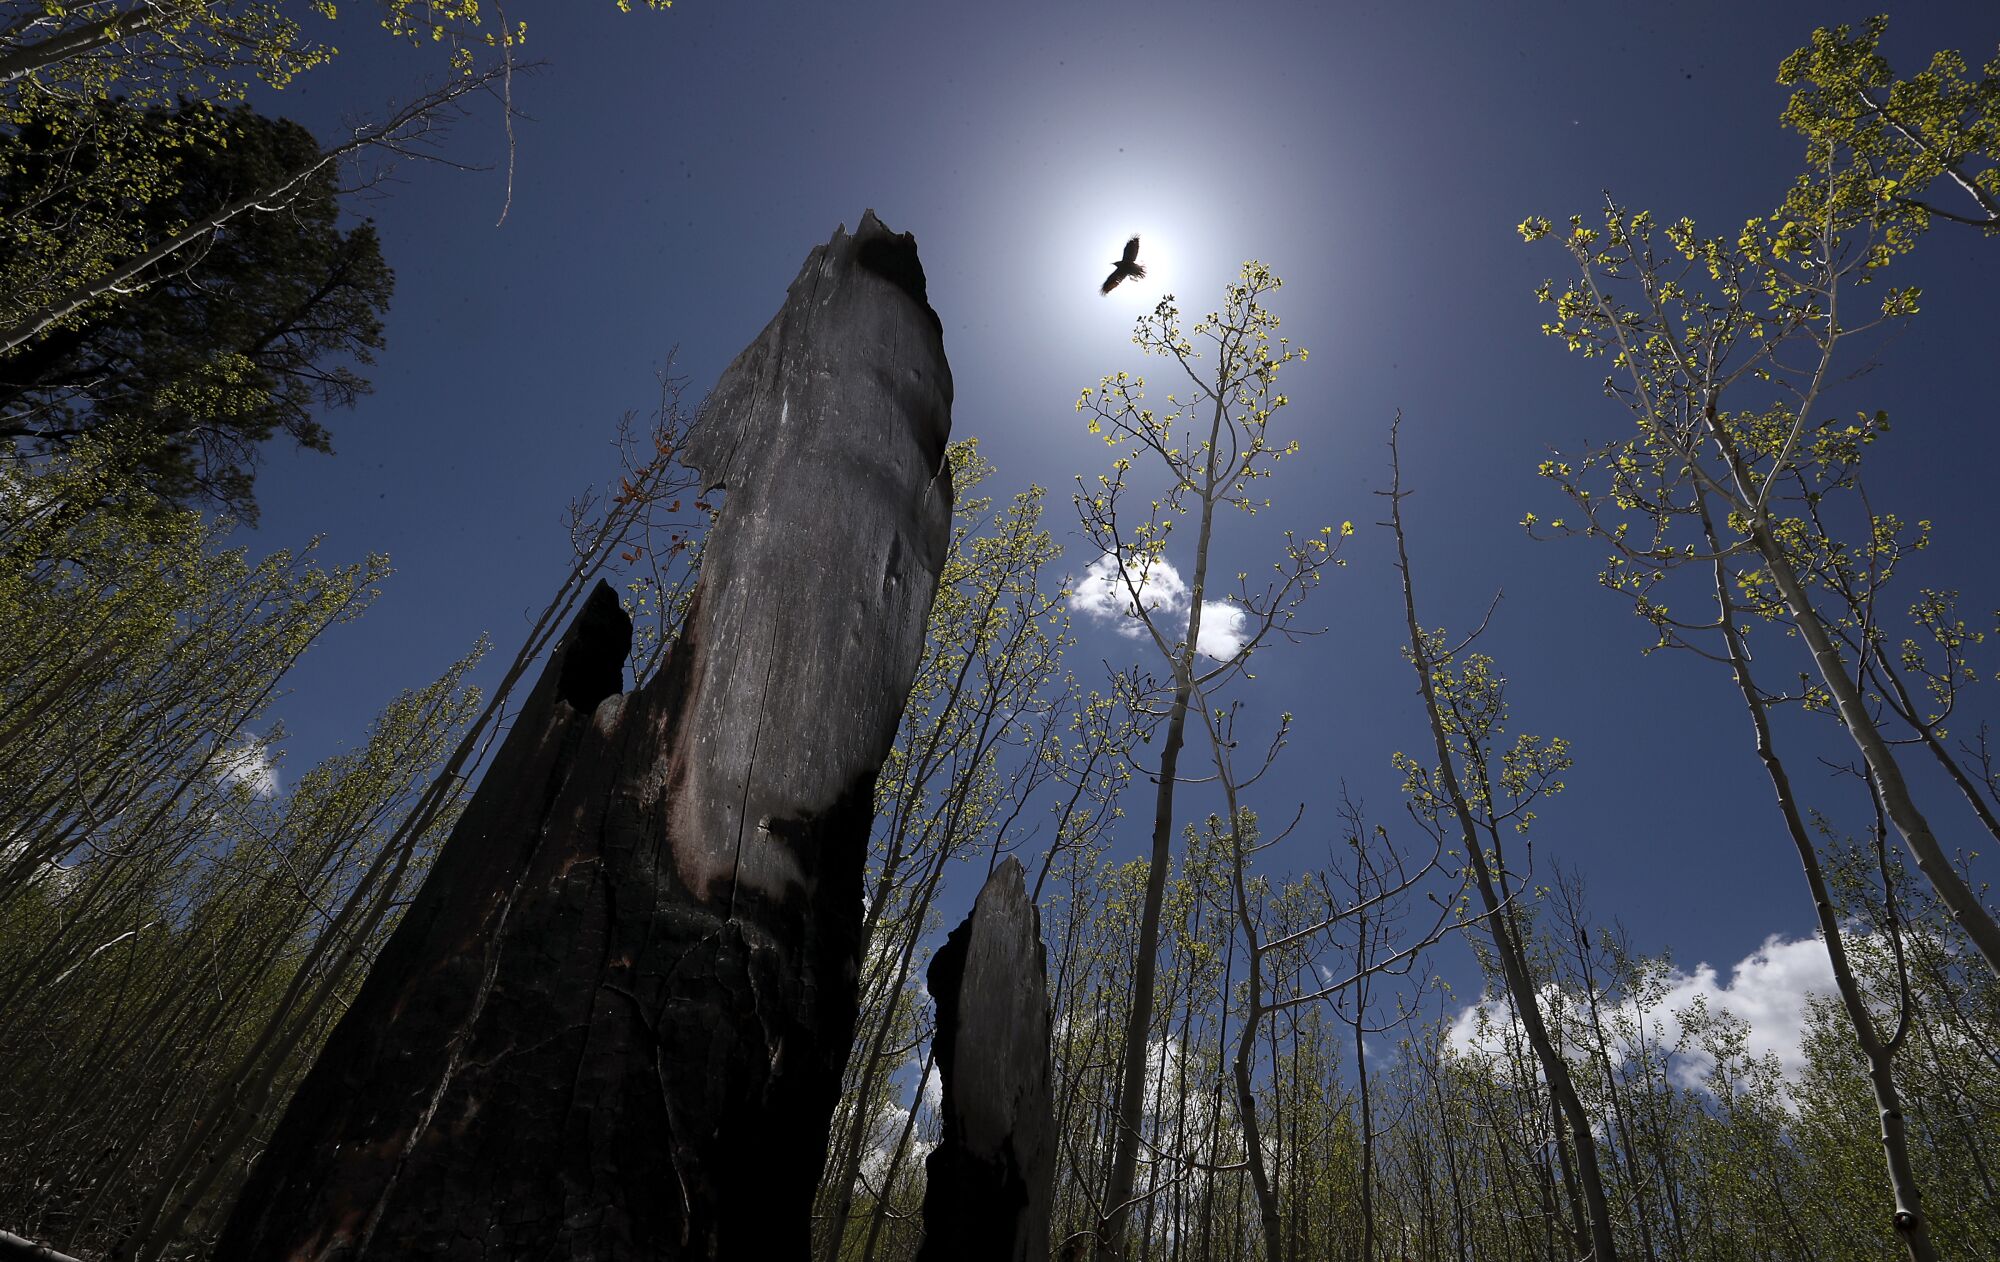 A bird flies over a charred tree stump in the Kaibab National Forest in northern Arizona.